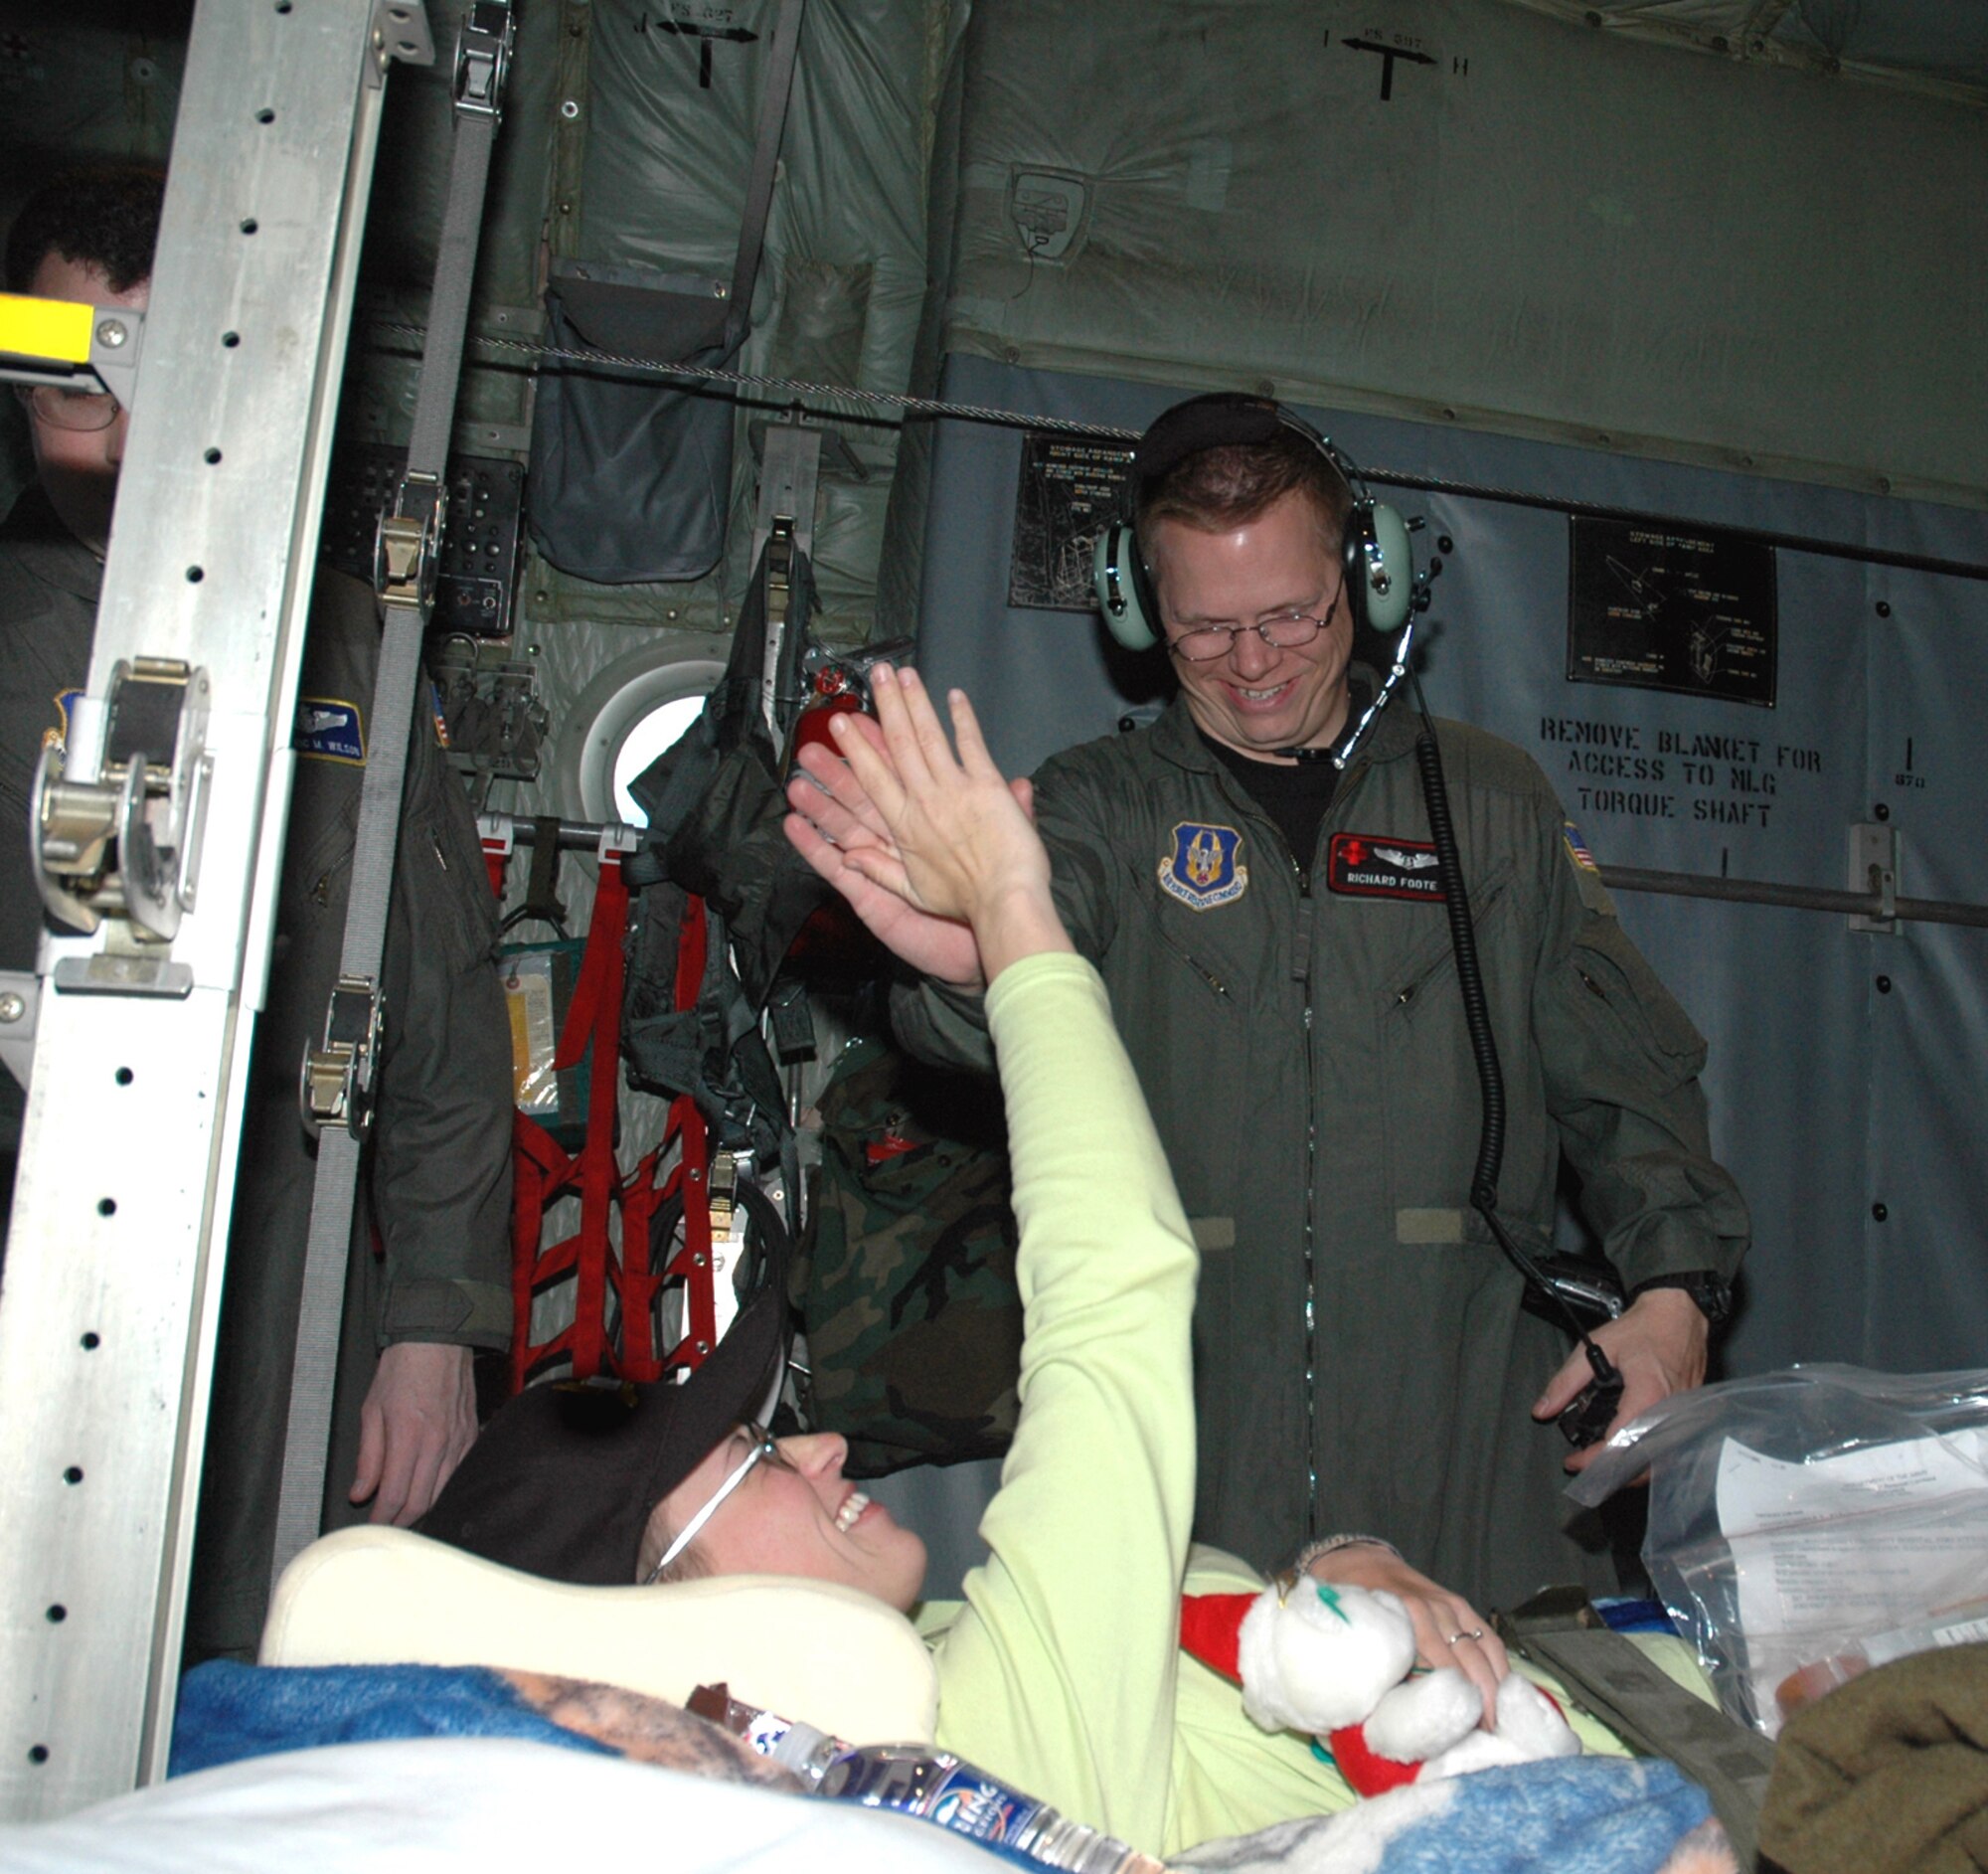 Capt. Richard Foote gets a high five from Army Pvt. Amber Zeunen as she is transported home aboard a C-130 Hercules. Private Zeunen was injured while serving in Operation Iraqi Freedom. Captain Foote is an Air Force Reserve Command flight nurse with the 908th Airlift Wing at Maxwell AFB, Ala. (U.S. Air Force photo/Lt. Col. Jerry W. Lobb)